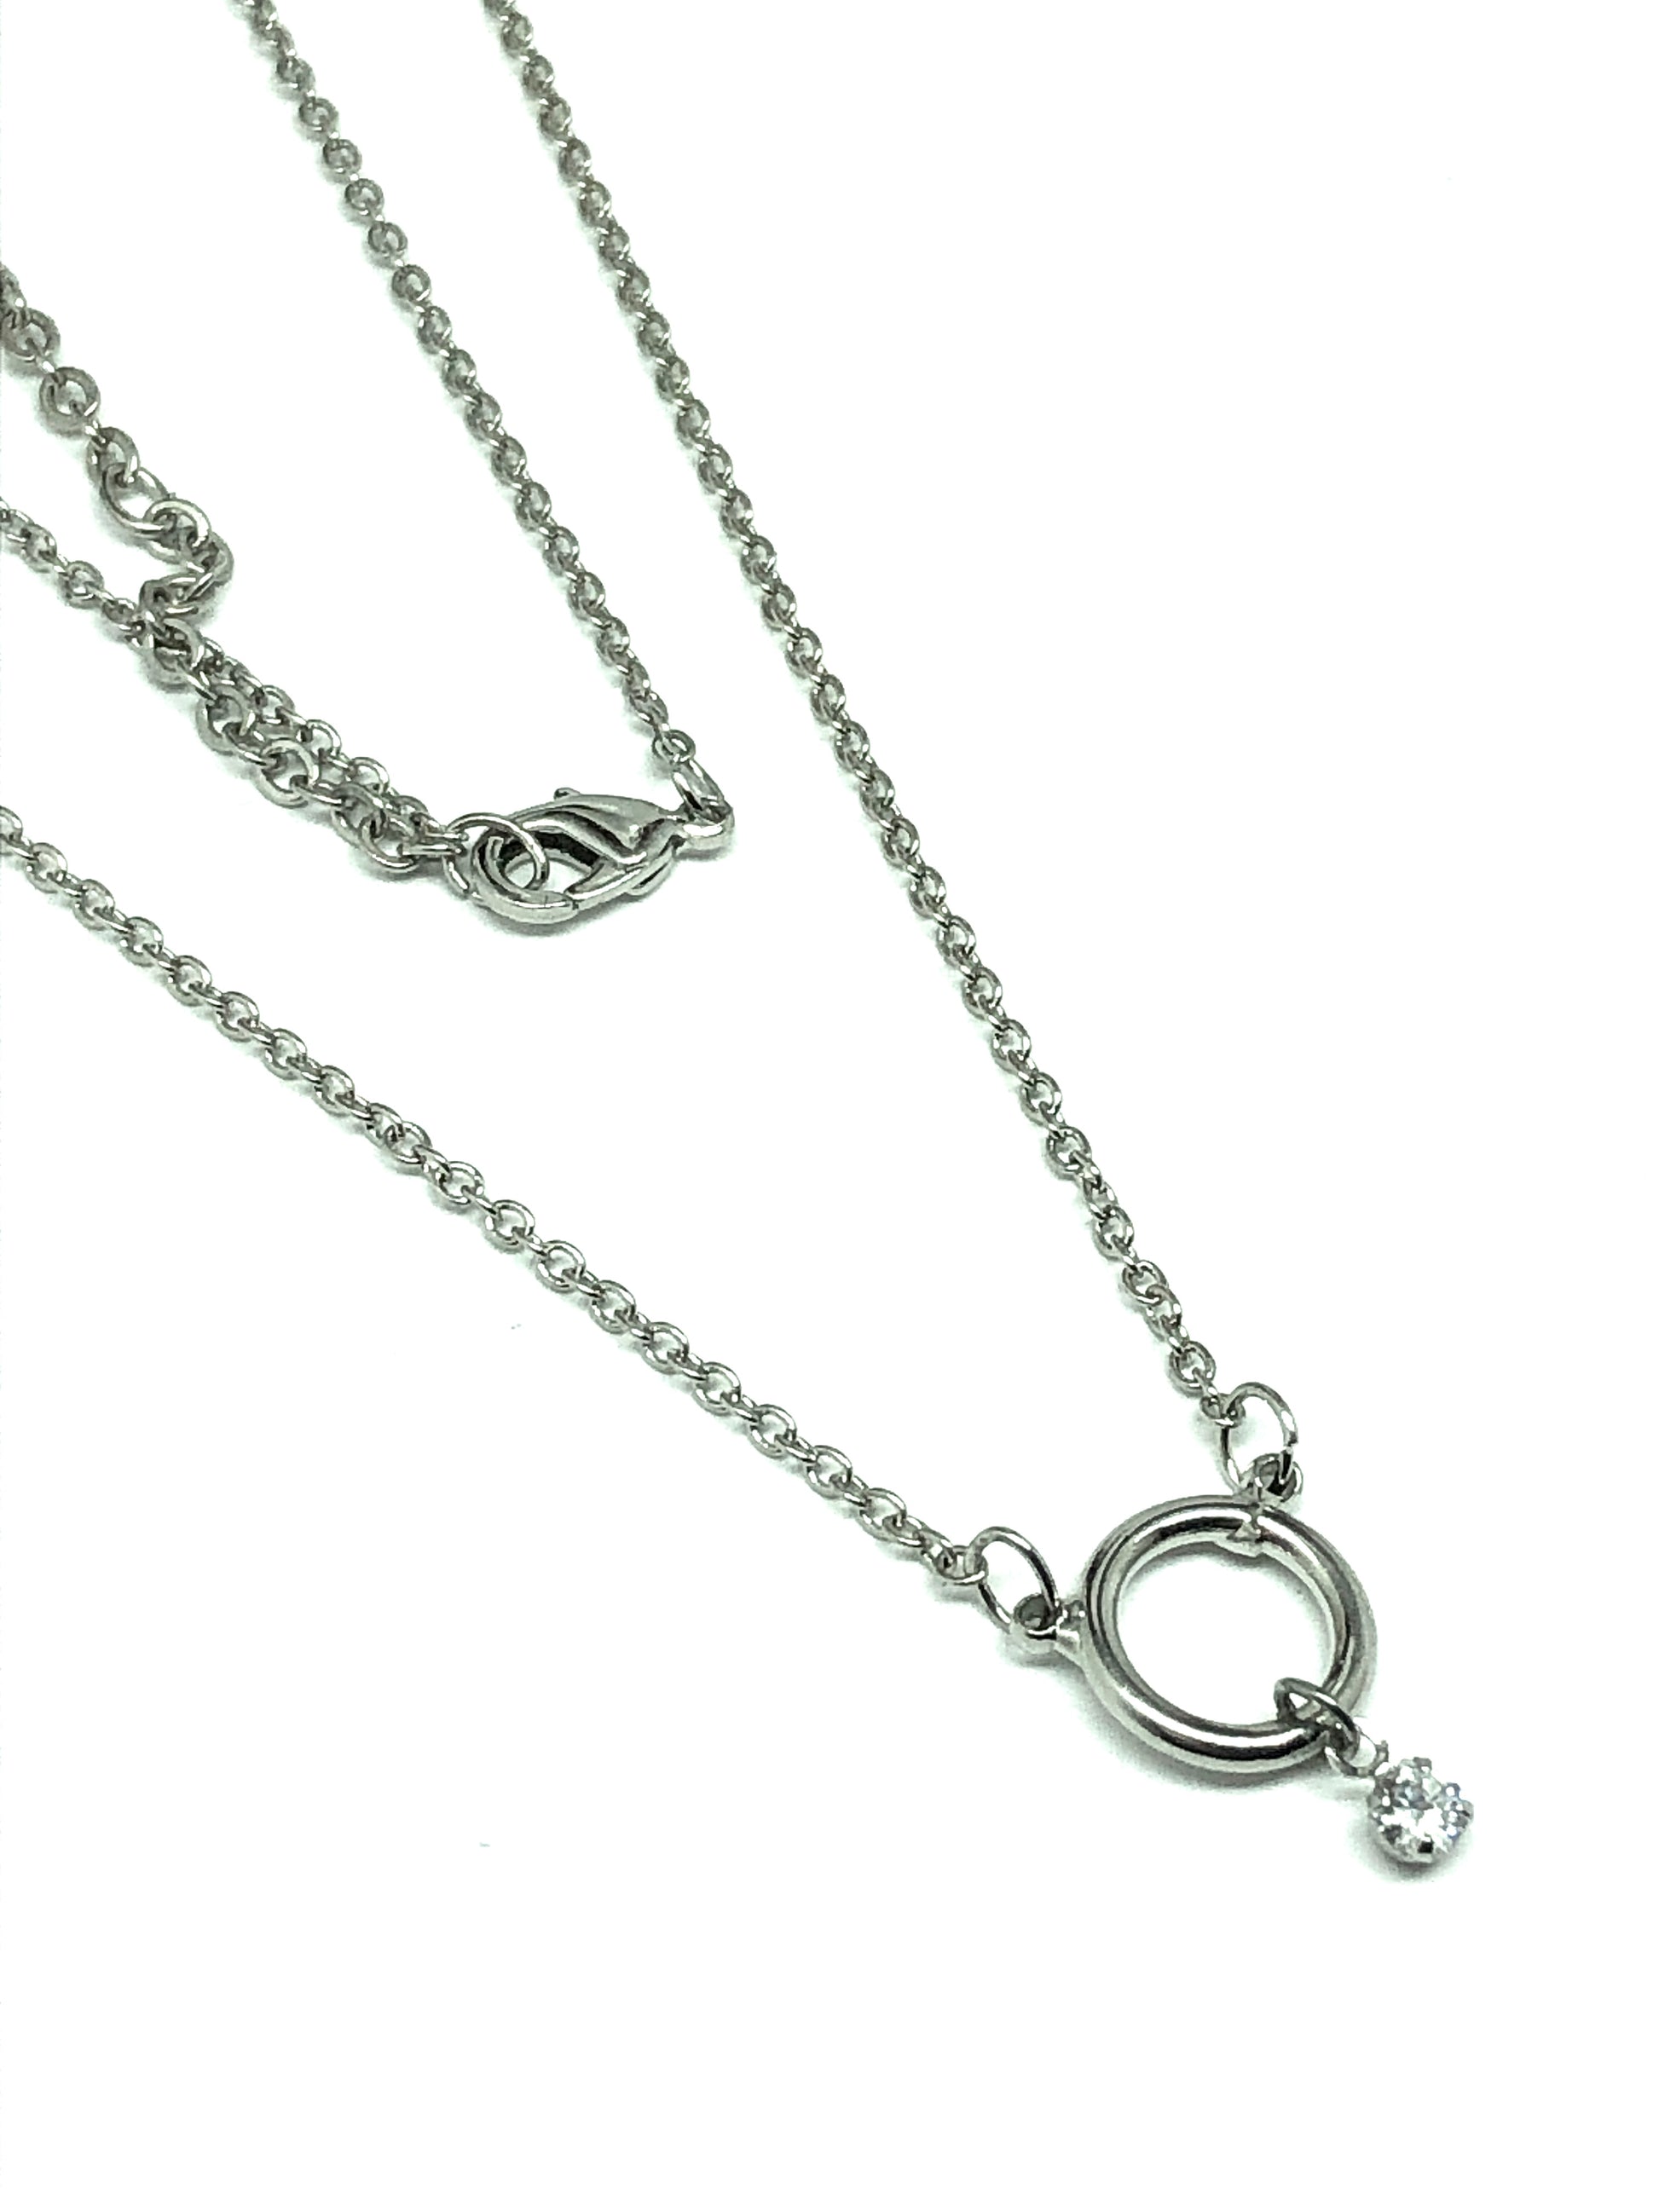 Womens Silver Necklace Adjustable 16-19" Small Circle Y Chain | Fashion Jewelry